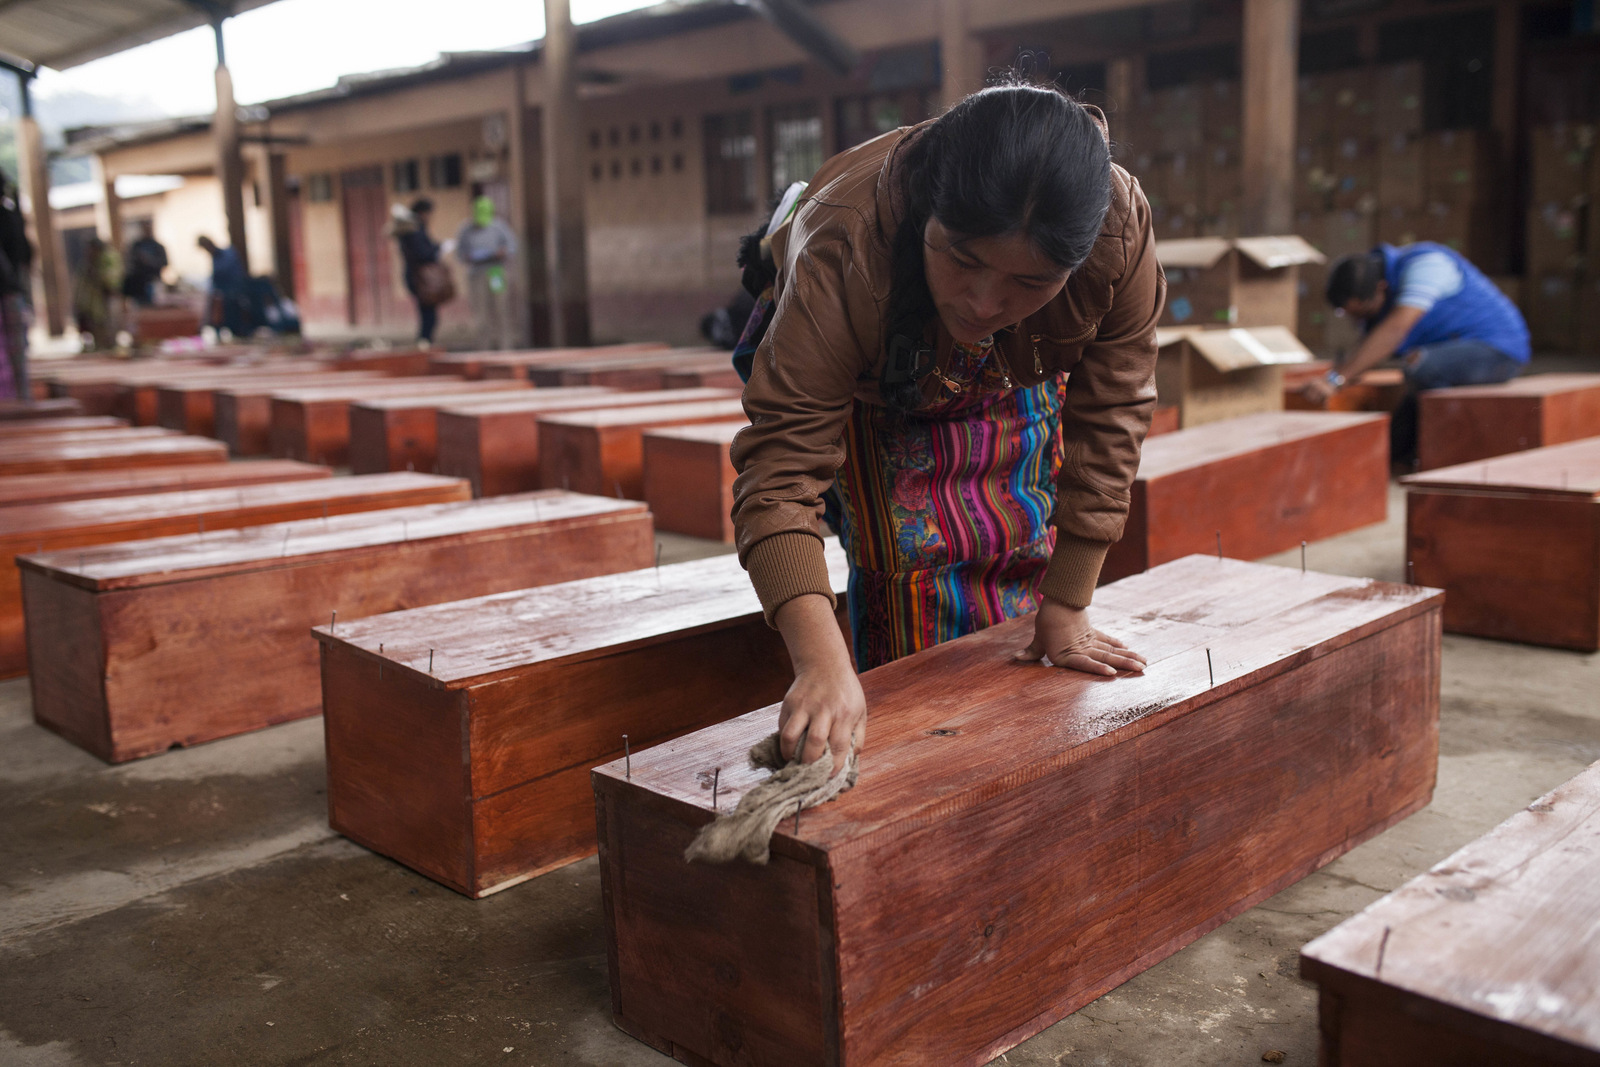 An Ixil Mayan woman cleans a coffin holding the remains of a civil war victim prior to a mass burial in Santa Avelina, Guatemala, Nov. 30, 2017. After seven years of work by forensic anthropologists, including DNA tests to locate relatives, the remains of 172 indigenous Ixil Mayans killed during the civil war between 1978 and 1982 were buried in the western mountains of Guatemala. (AP/Moises Castillo)